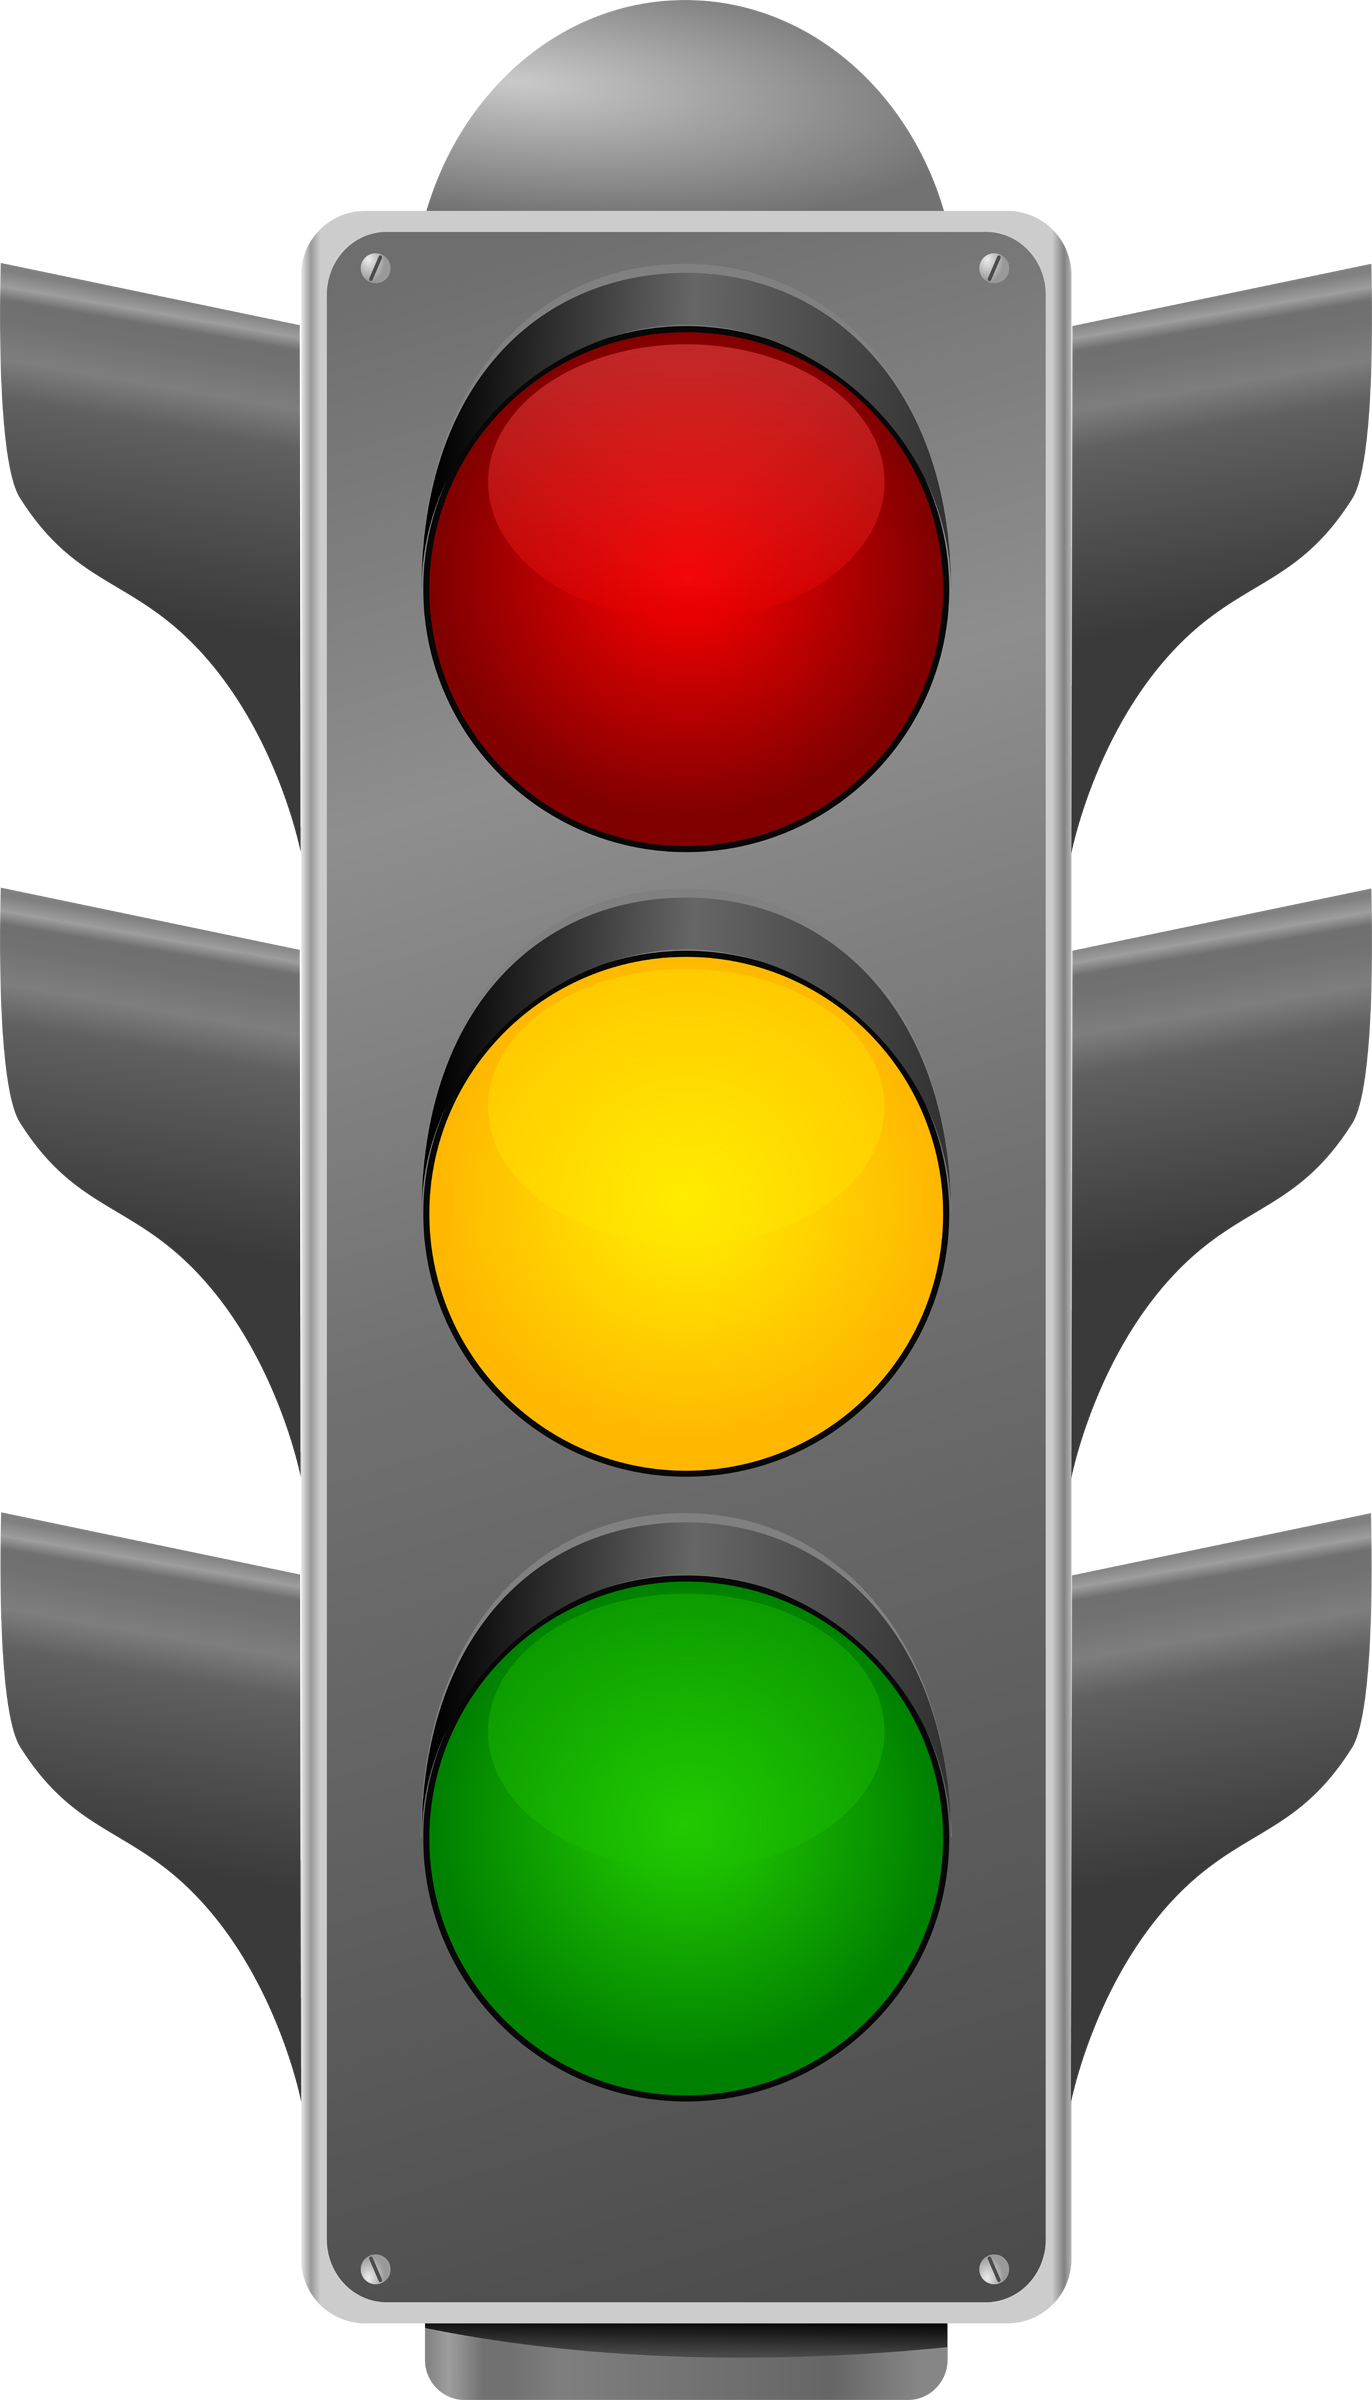 Traffic Light Icons Clipart - Cliparts and Others Art Inspiration